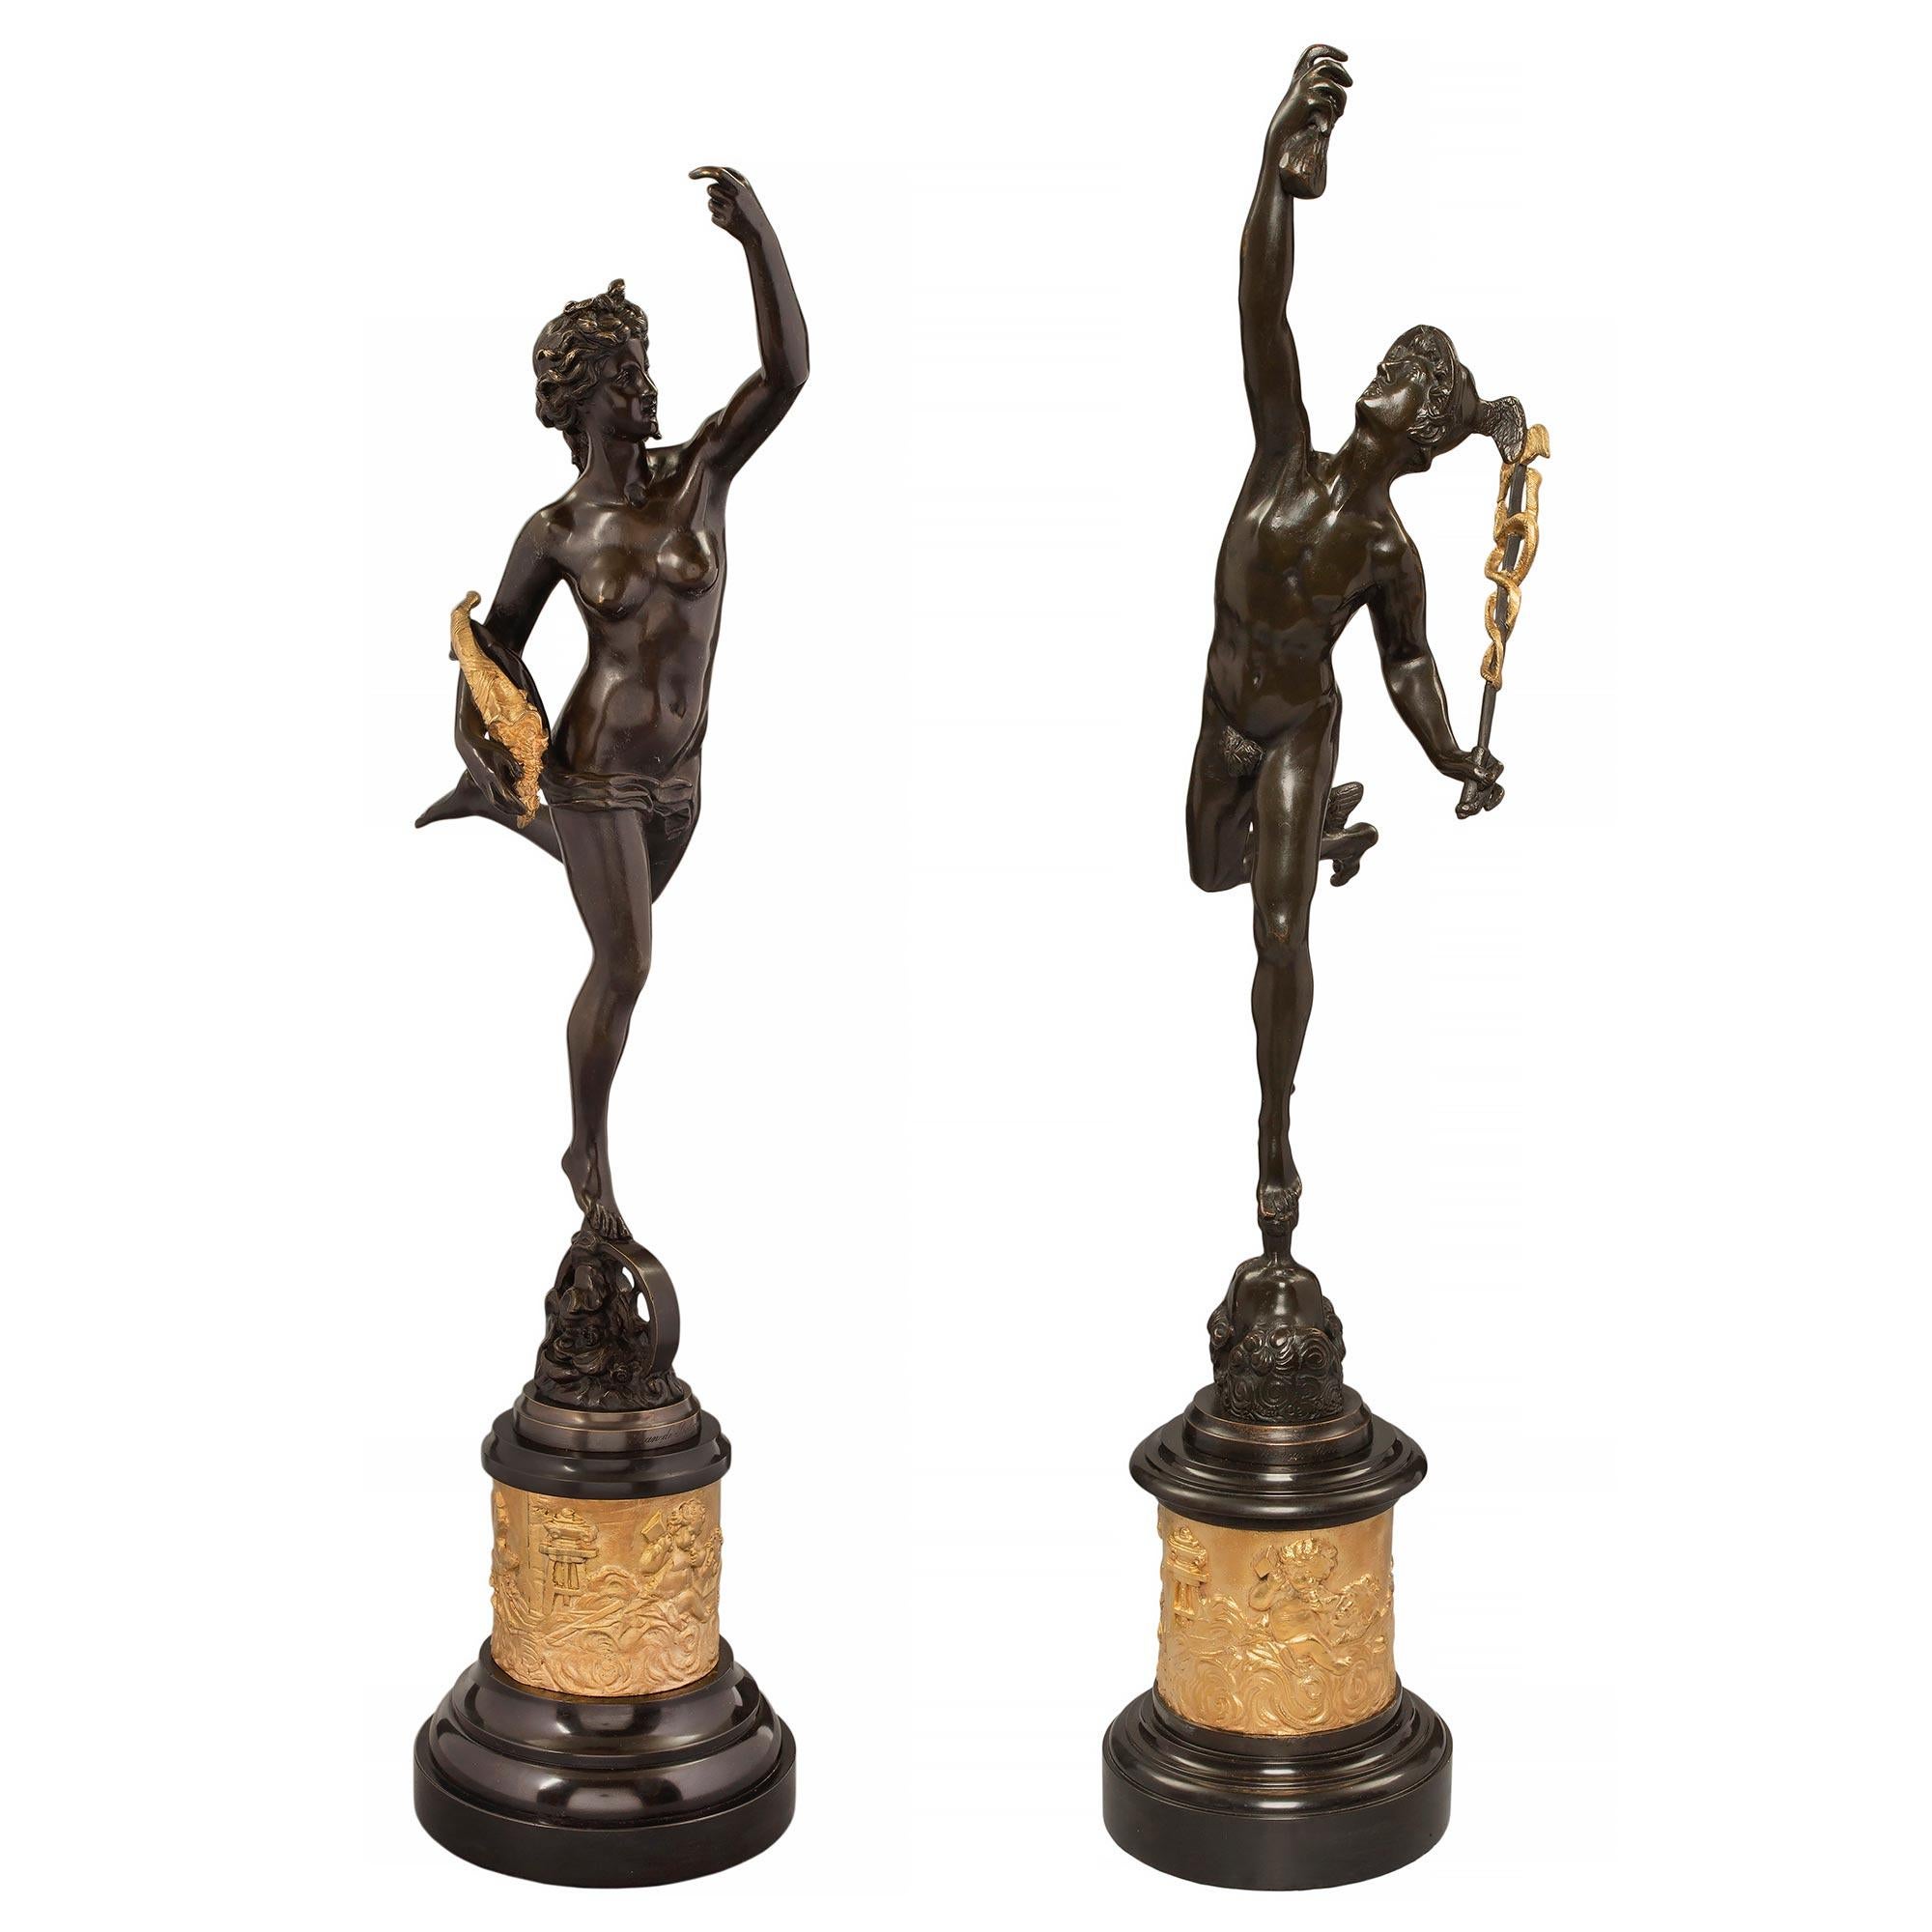 A stunning and high quality true pair of French 19th century Louis XVI st. patinated bronze, ormolu and black Belgian marble statues of Mercury and Fortuna, after a model by Louis Guillaume Fulconis signed Jean de Boulogne and Clodion. Each statue